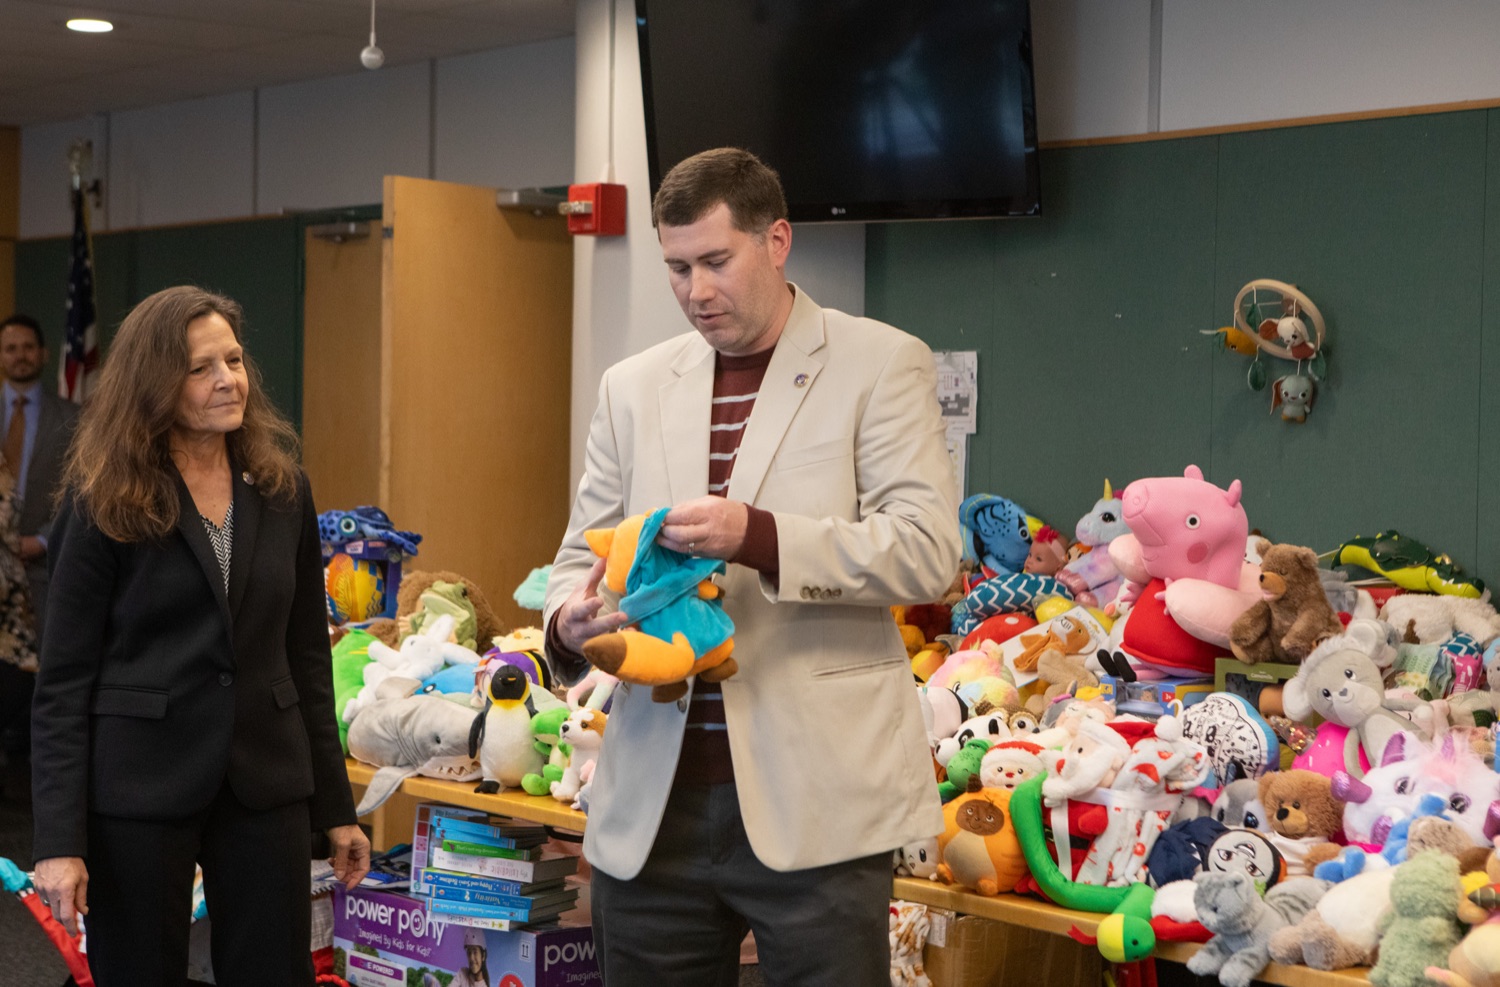 Matthew Kegg, Director Bureau of Occupational and Industrial Safety with Labor & Industry, joined Human Services (DHS) to kick off the 2023 holiday season Wednesday with an annual donation of stuffed toys collected throughout the year by L&I during routine safety inspections. The toys will be distributed to Pennsylvania families through DHS Holiday Wish program.<br><a href="https://filesource.amperwave.net/commonwealthofpa/photo/24018_LI_StuffedToys_ERD_005.jpg" target="_blank">⇣ Download Photo</a>